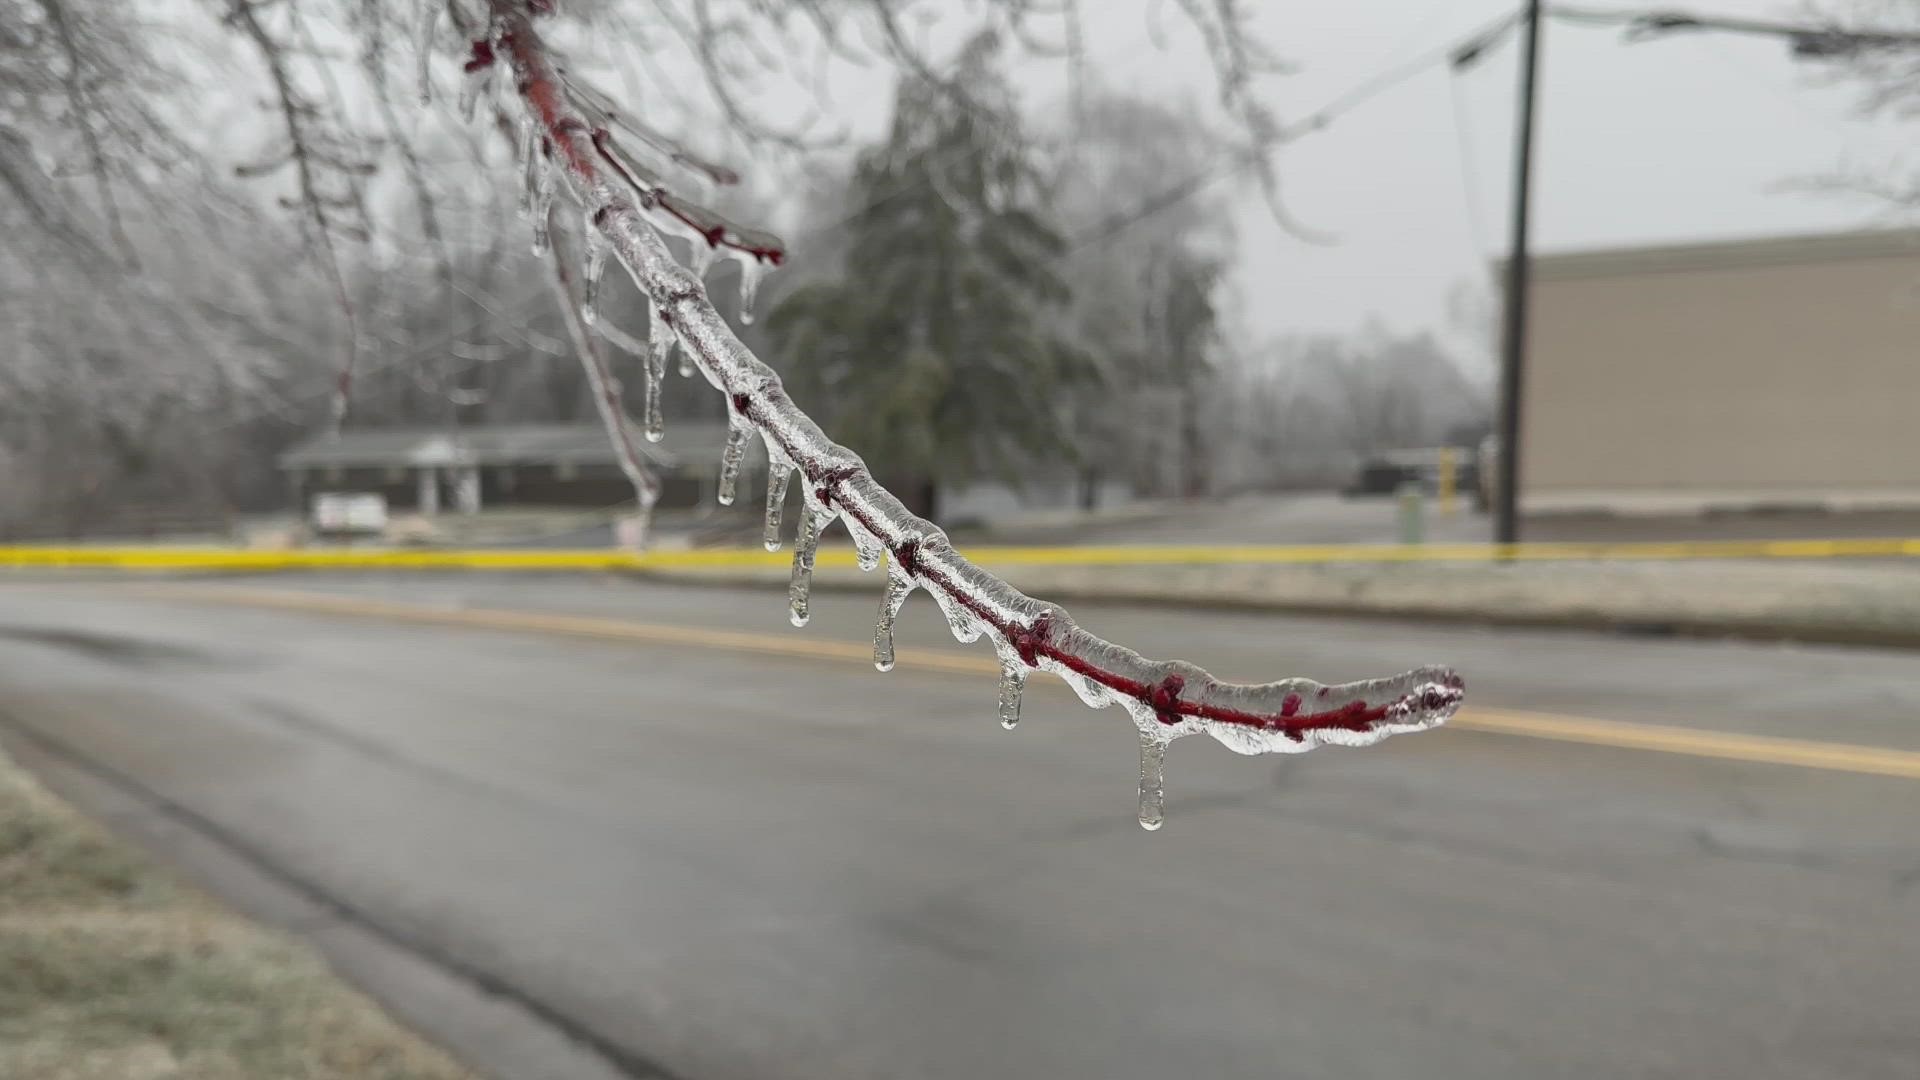 While beautiful, the ice has knocked out power for thousands of people in southwest Michigan.